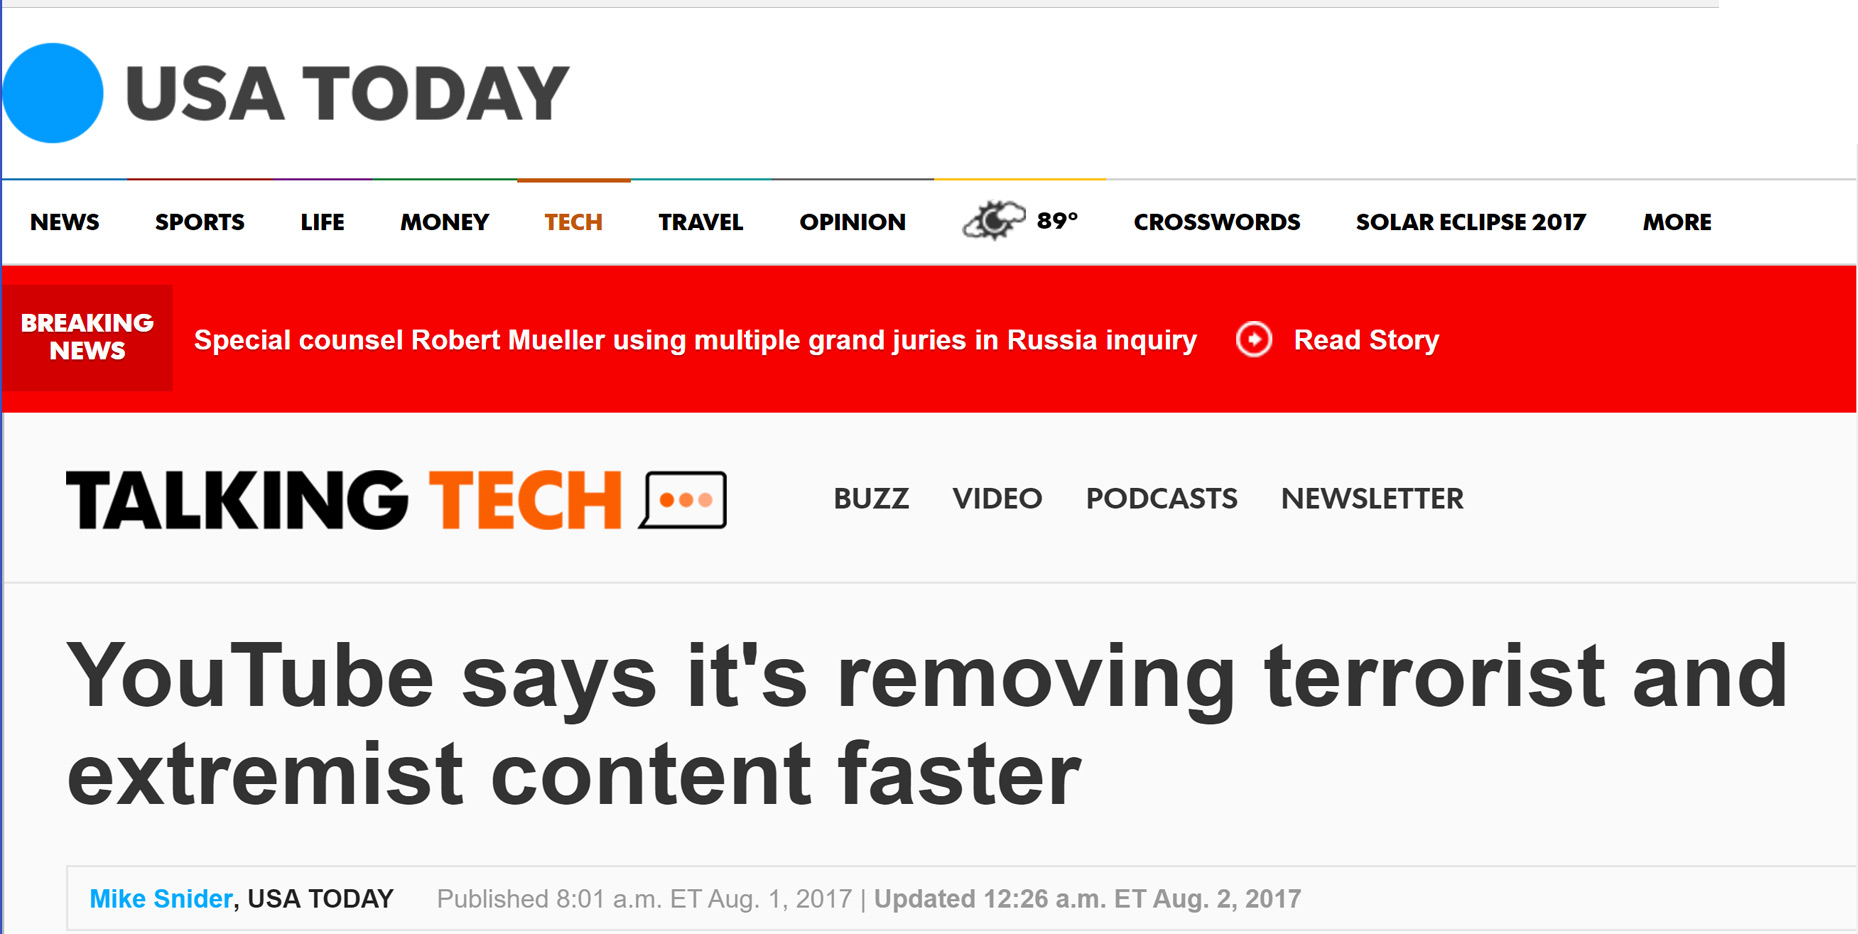 23-YouTube-says-it's-removing-terrorist-and-extremist-content-faster.jpg